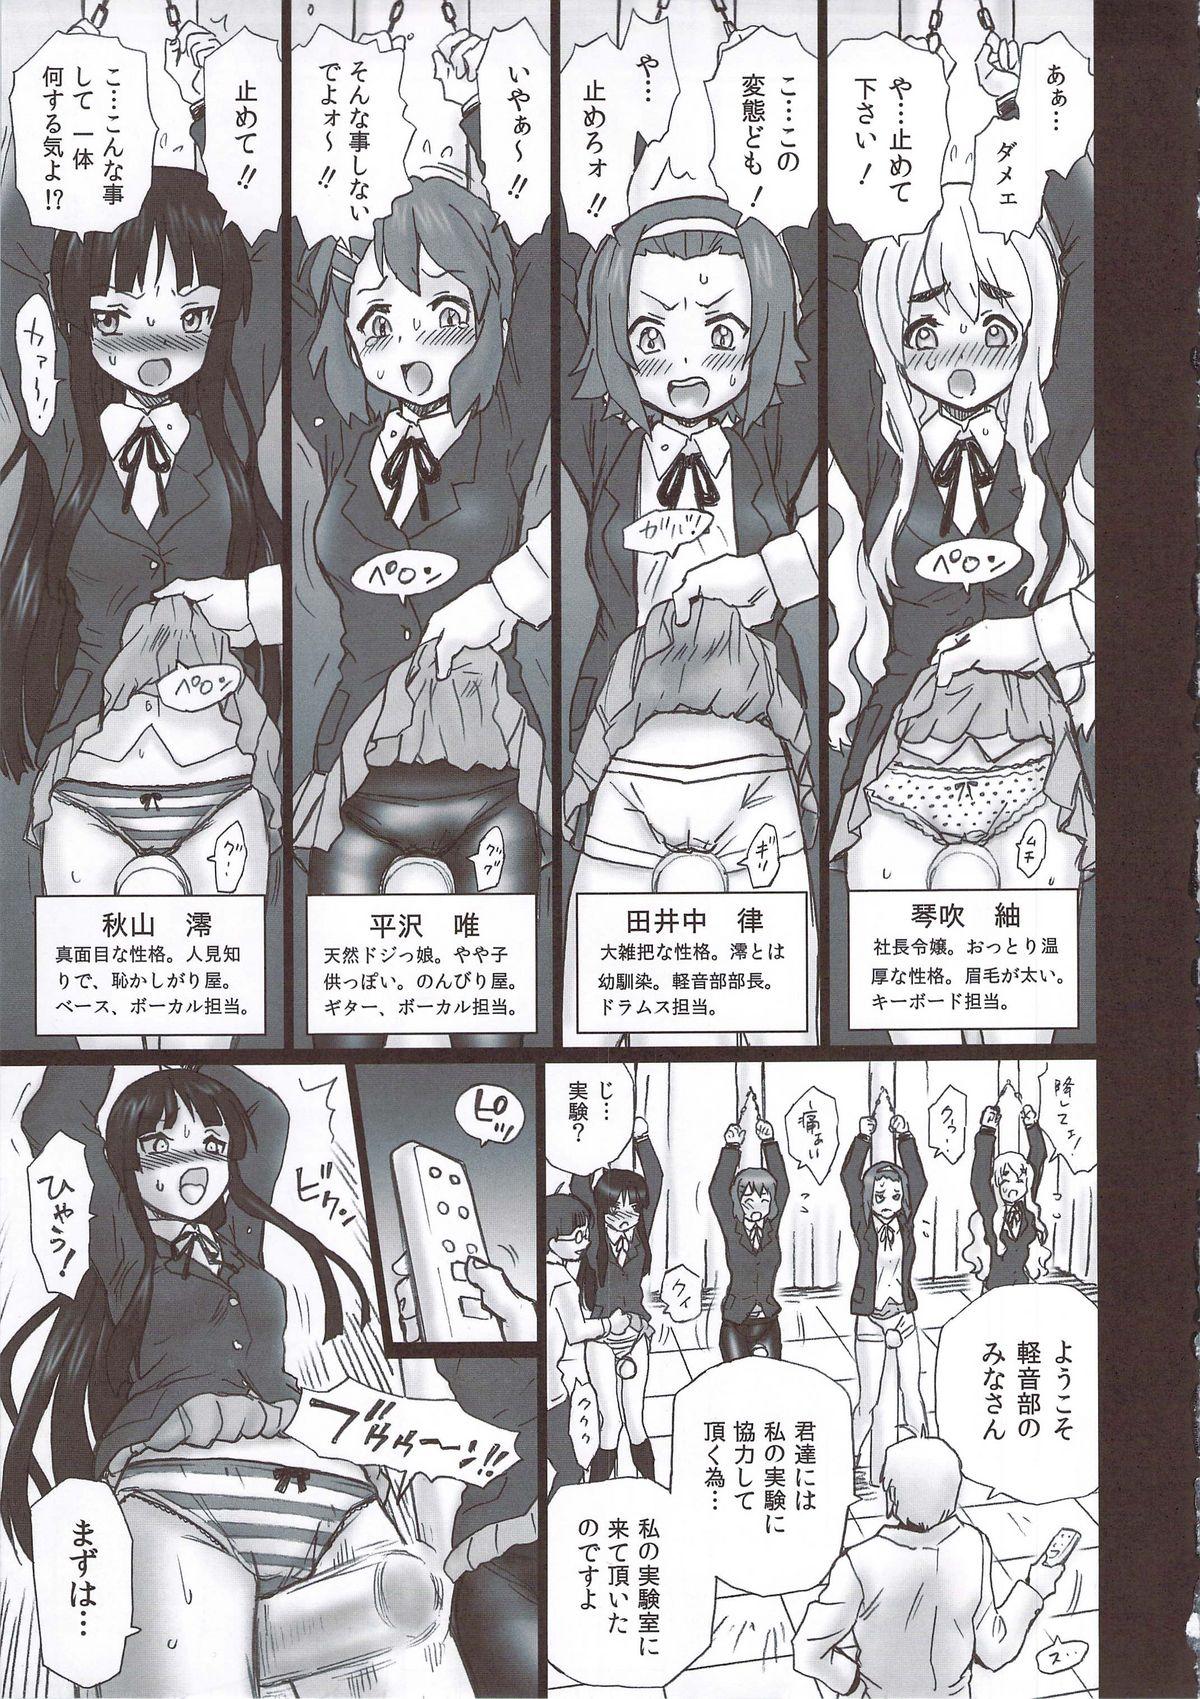 Submission TAIL-MAN KEION! 5GIRLS BOOK BOOK - K-on Verification - Page 4